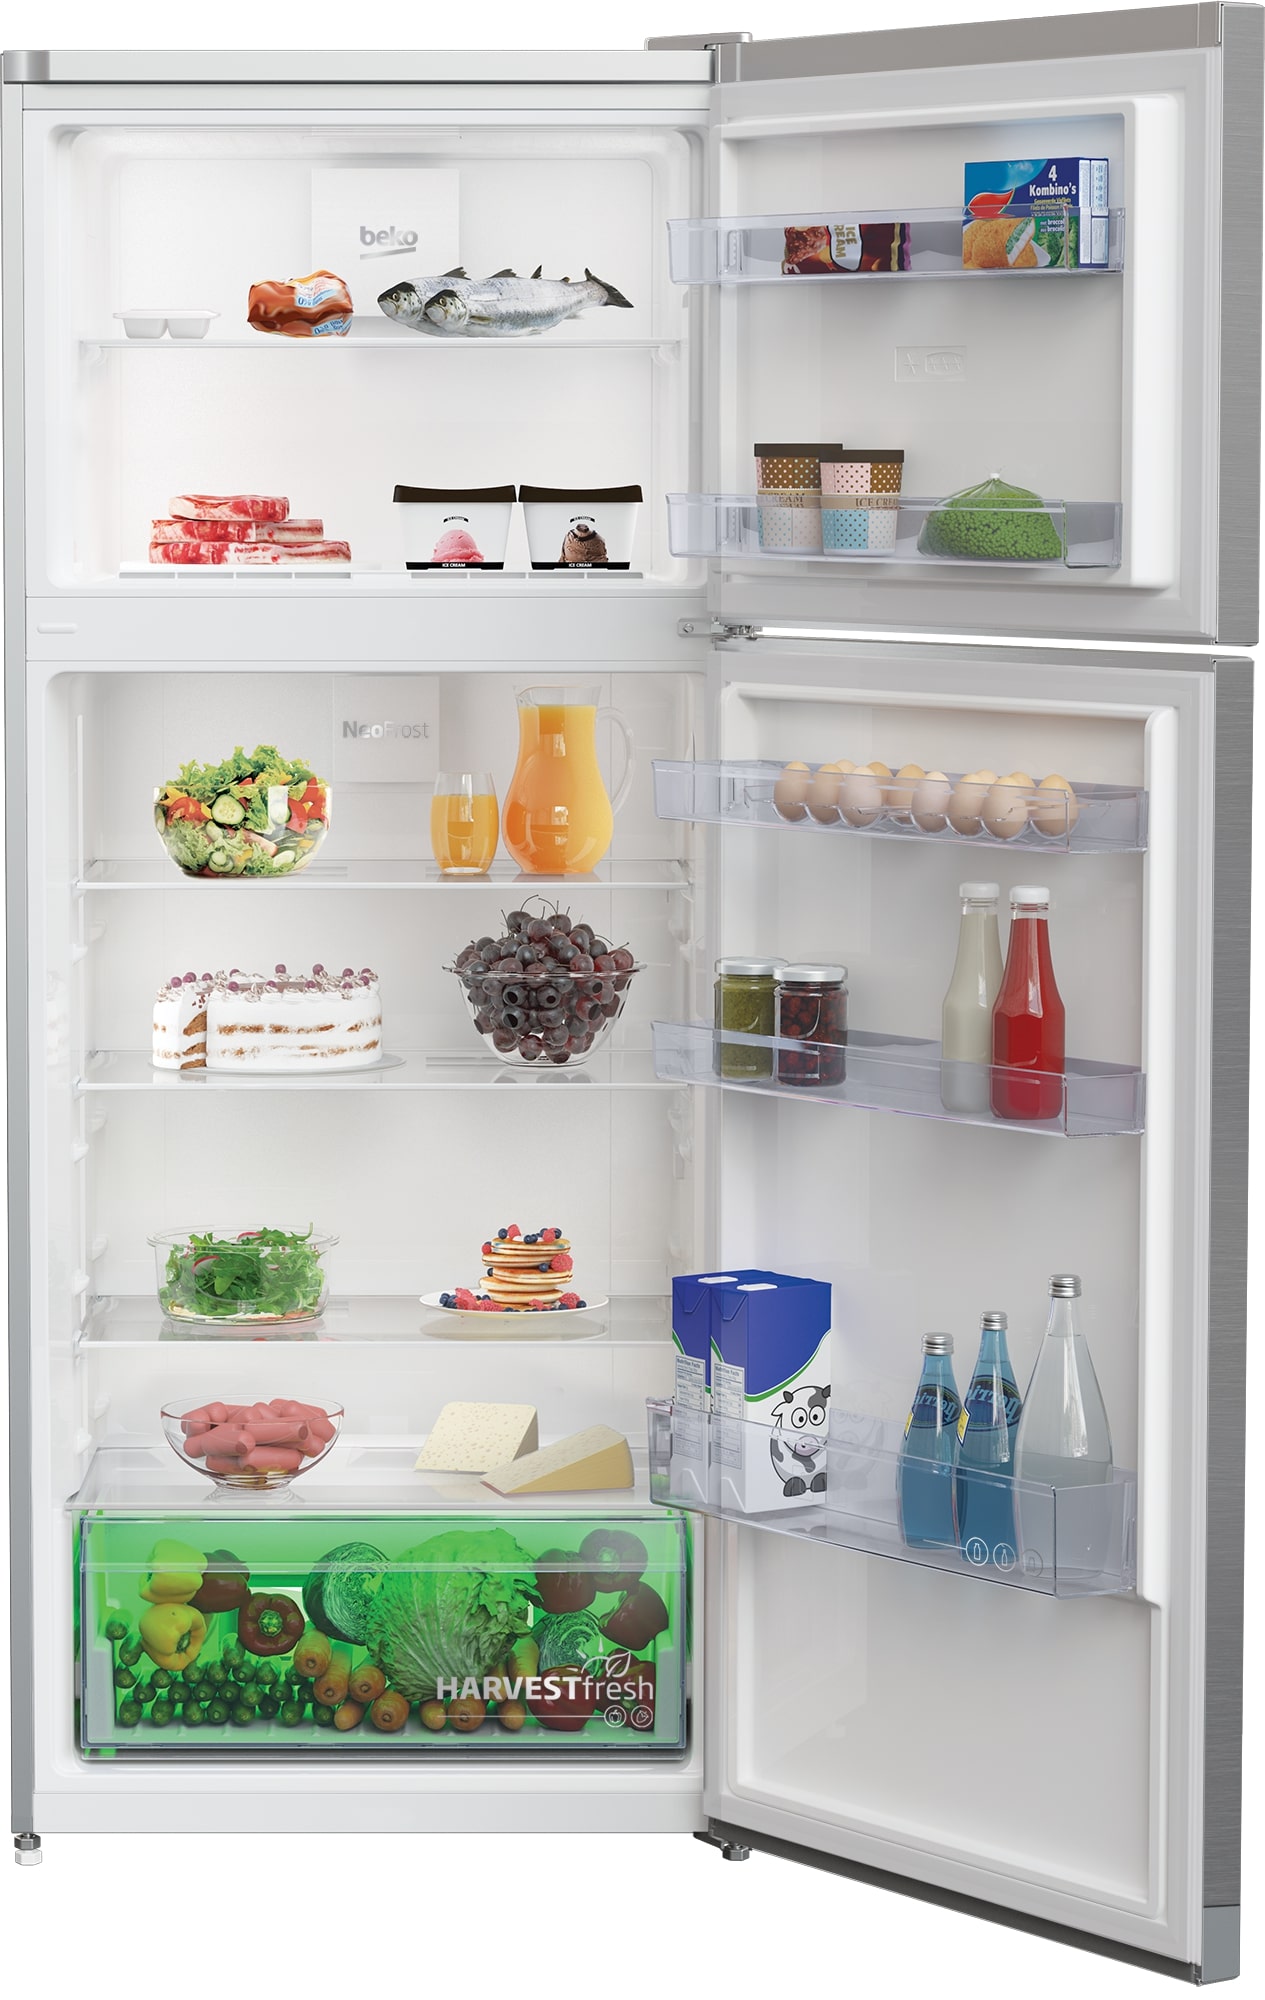 Refrigerator with Top Freezer 490L from Beko